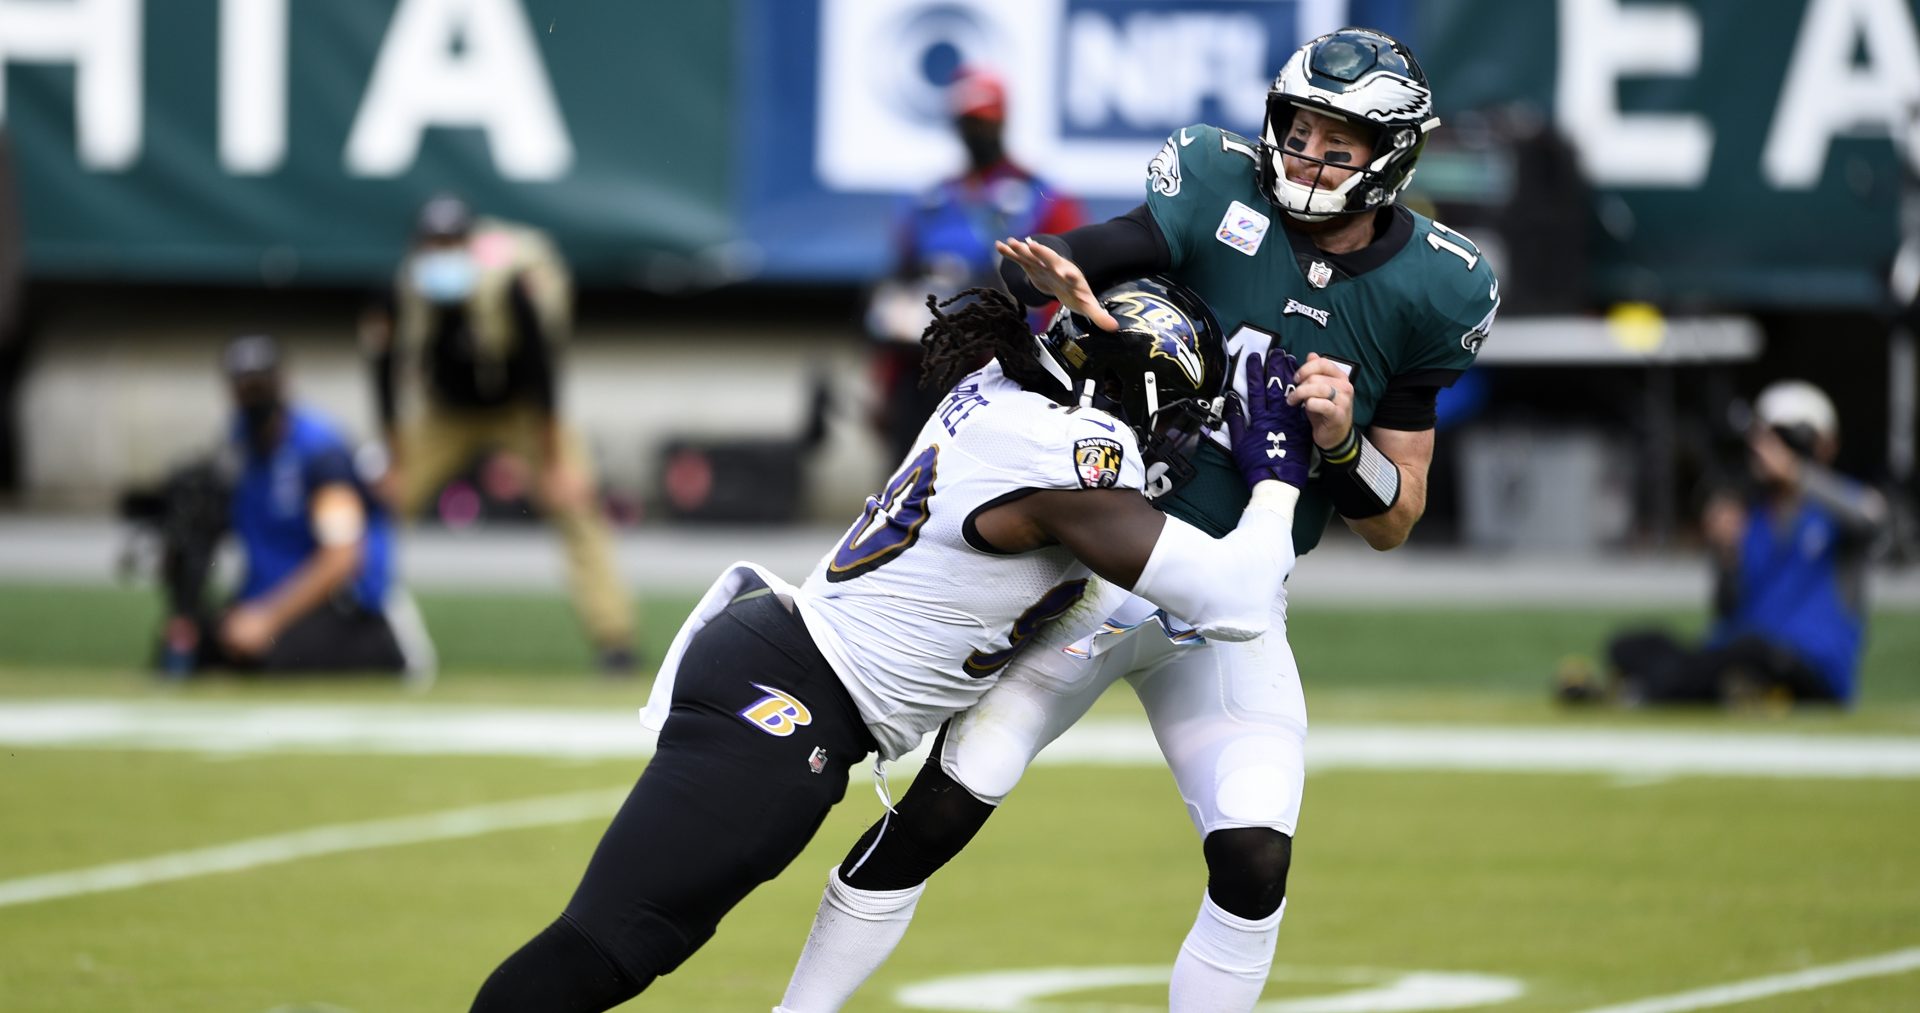 Philadelphia Eagles' Carson Wentz (11) is hit by Baltimore Ravens' Pernell McPhee (90) during the second half of an NFL football game, Sunday, Oct. 18, 2020, in Philadelphia.